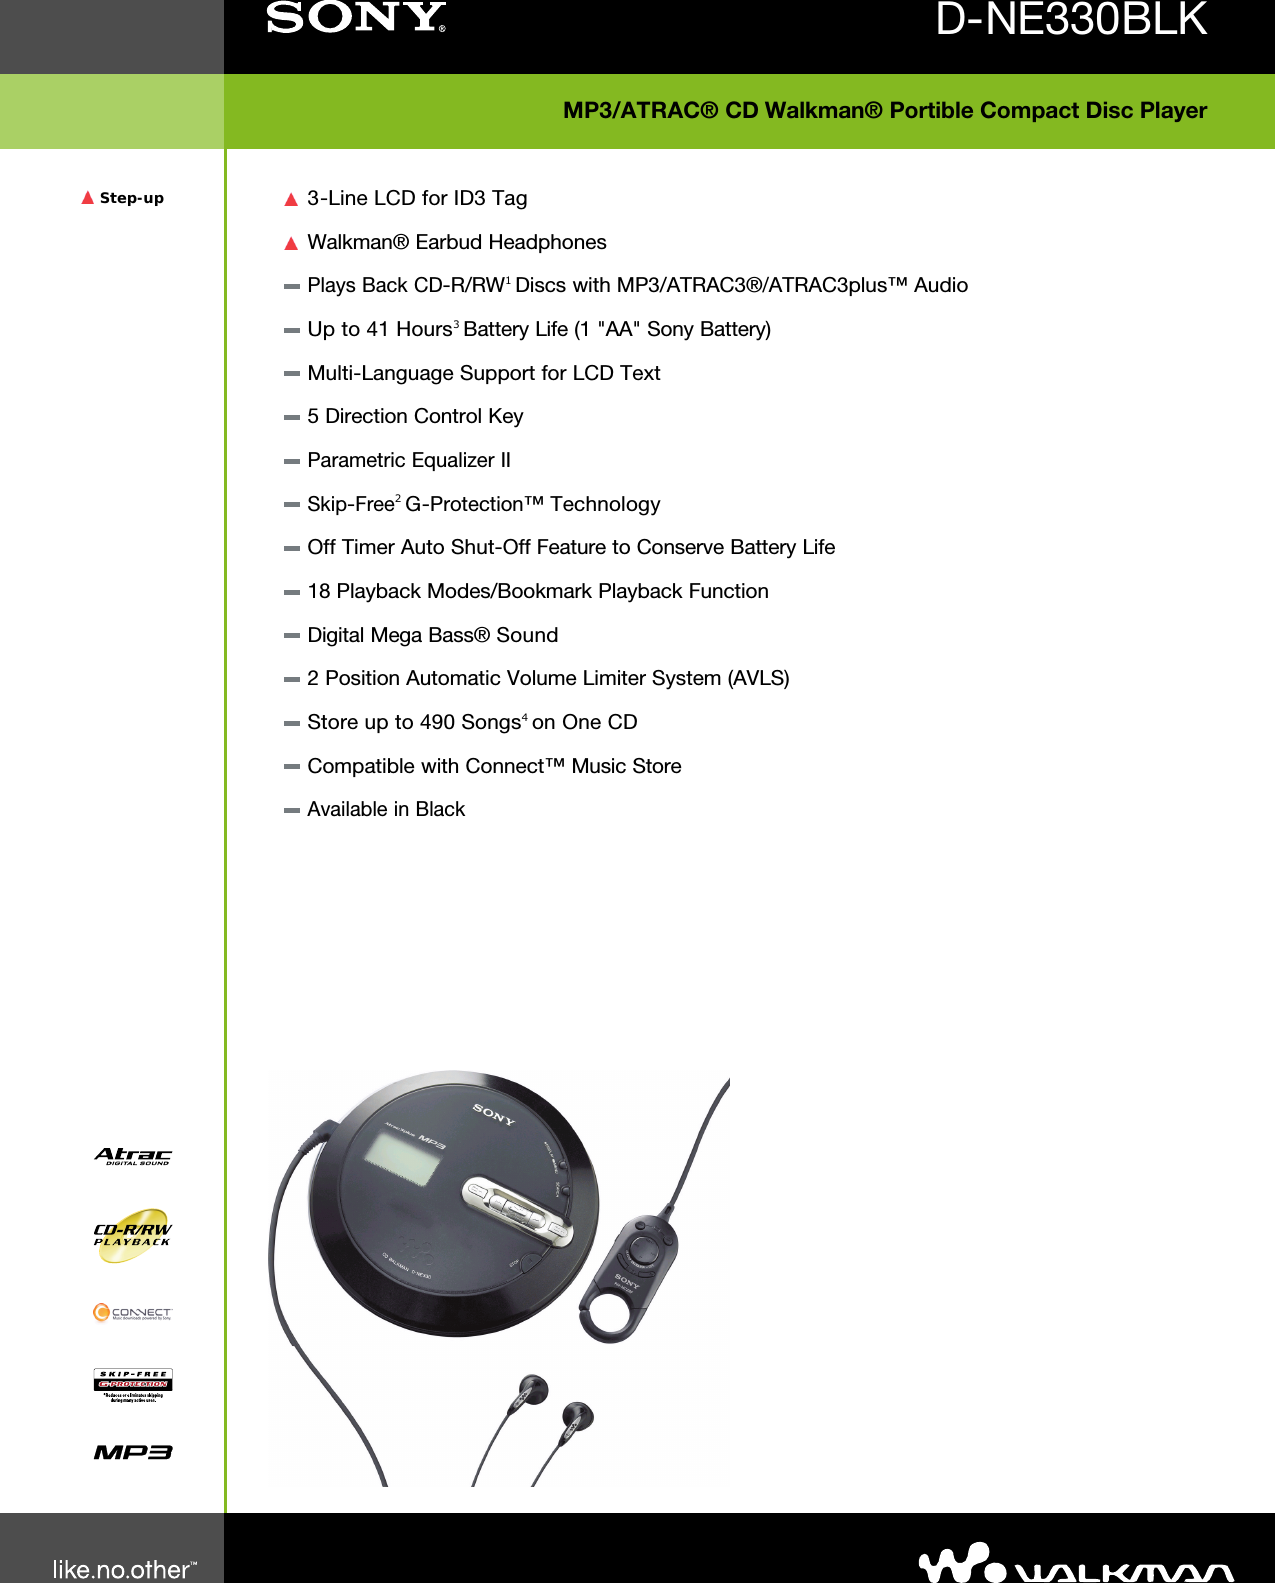 Page 1 of 2 - Sony D-NE330 User Manual Product Specifications DNE330BLACK Specs